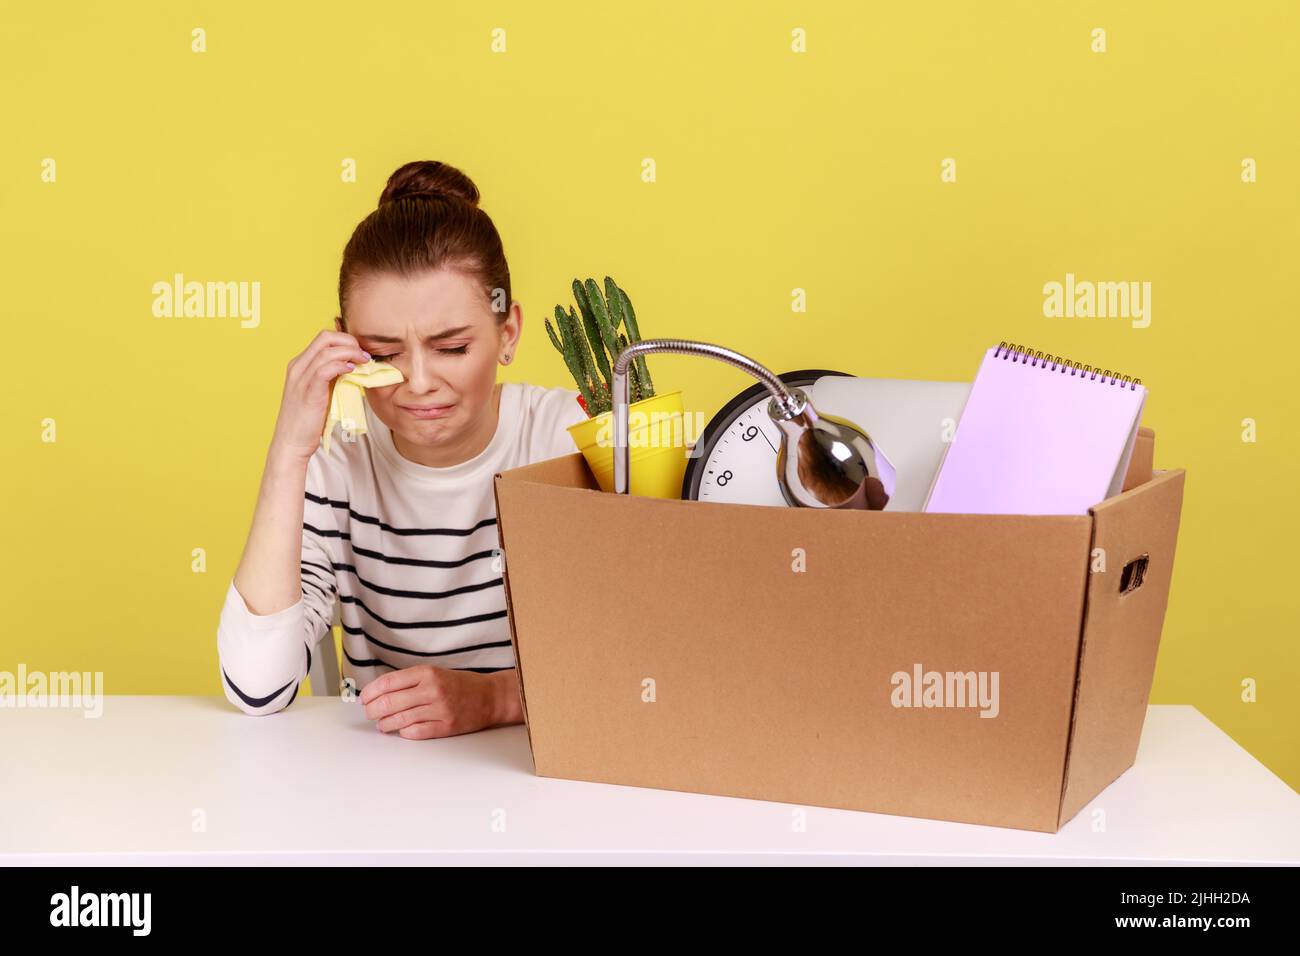 Depressed desperate young woman office worker sitting at workplace with cardboard box with her things and crying, being fired. Indoor studio studio shot isolated on yellow background. Stock Photo